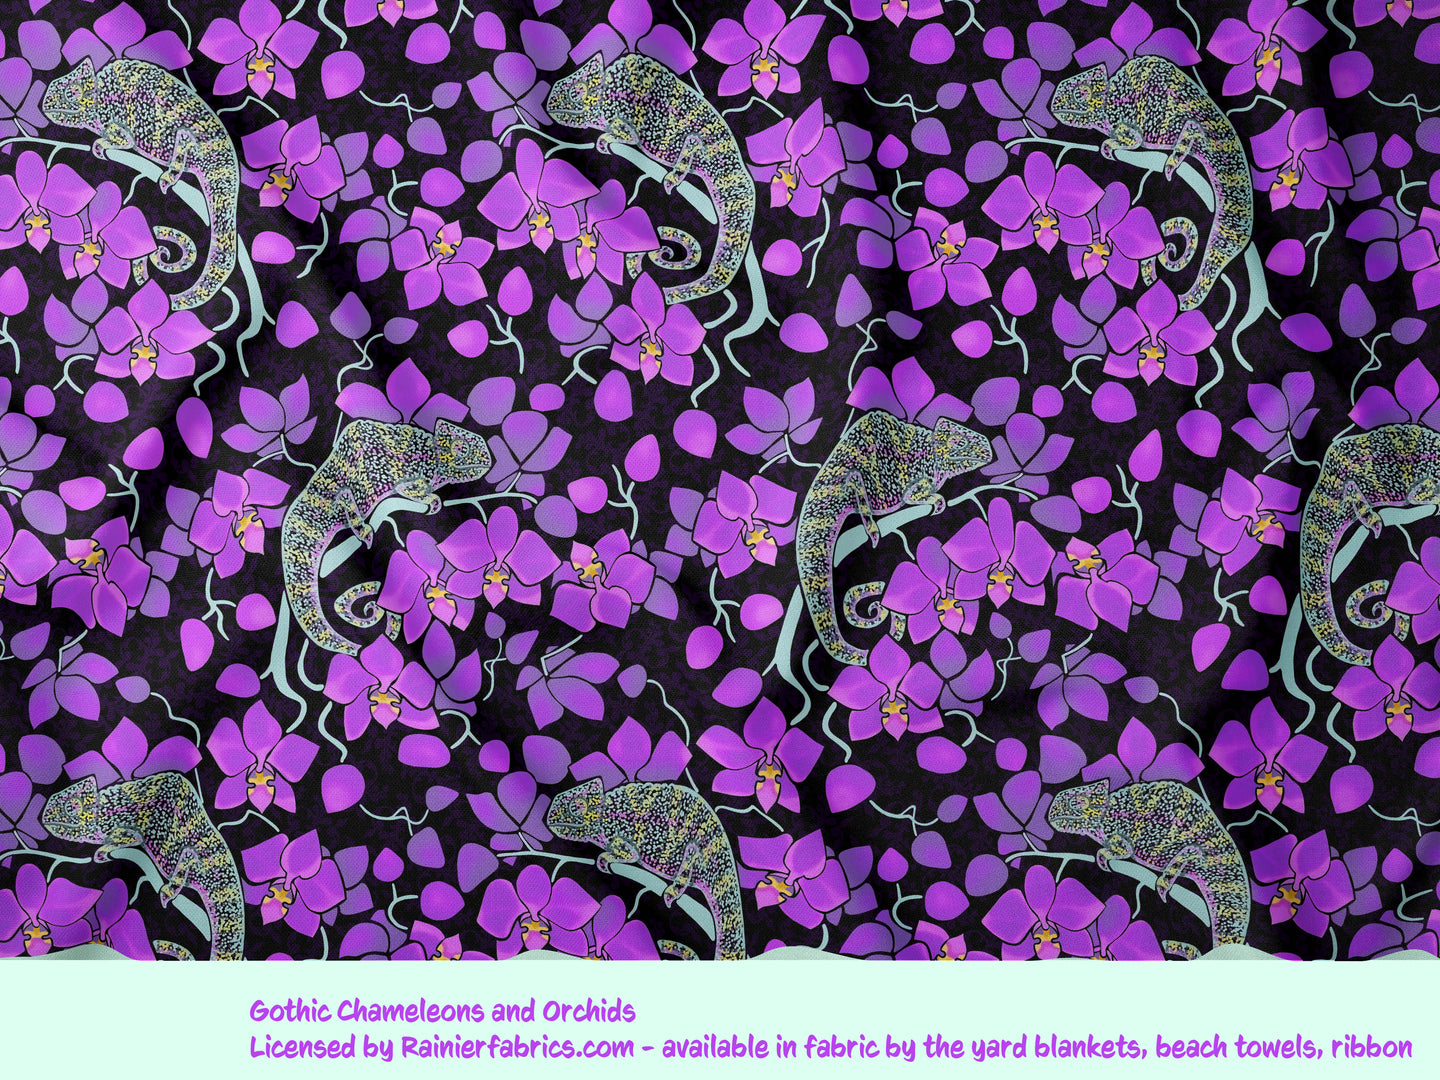 Gothic Chameleons and Orchids - 2-5 day turnaround - Order by 1/2 yard; Description of bases below